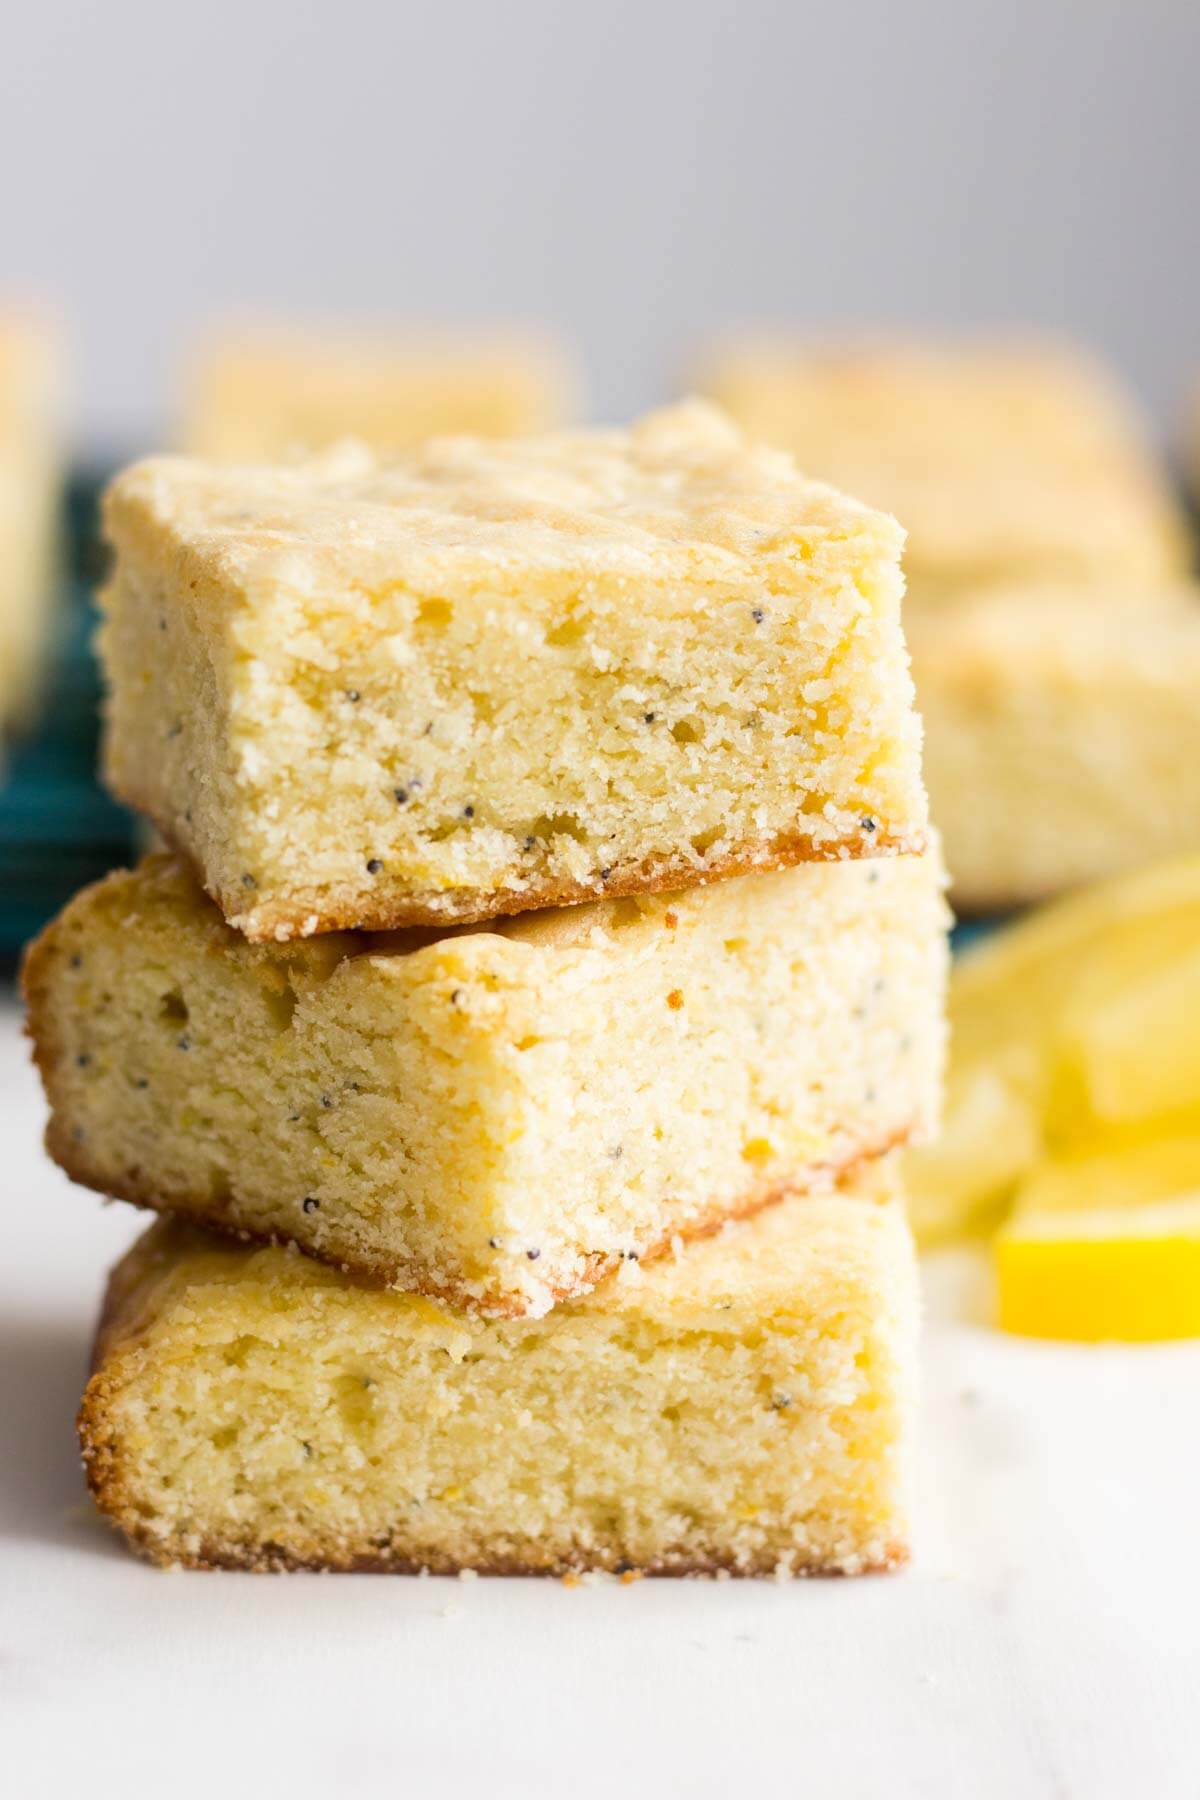 These glazed lemon poppy seed bars are a zingy lemon dessert! These bars are easy to make and are packed with some serious spring flavor. The lemon glaze will leave you wanting more.